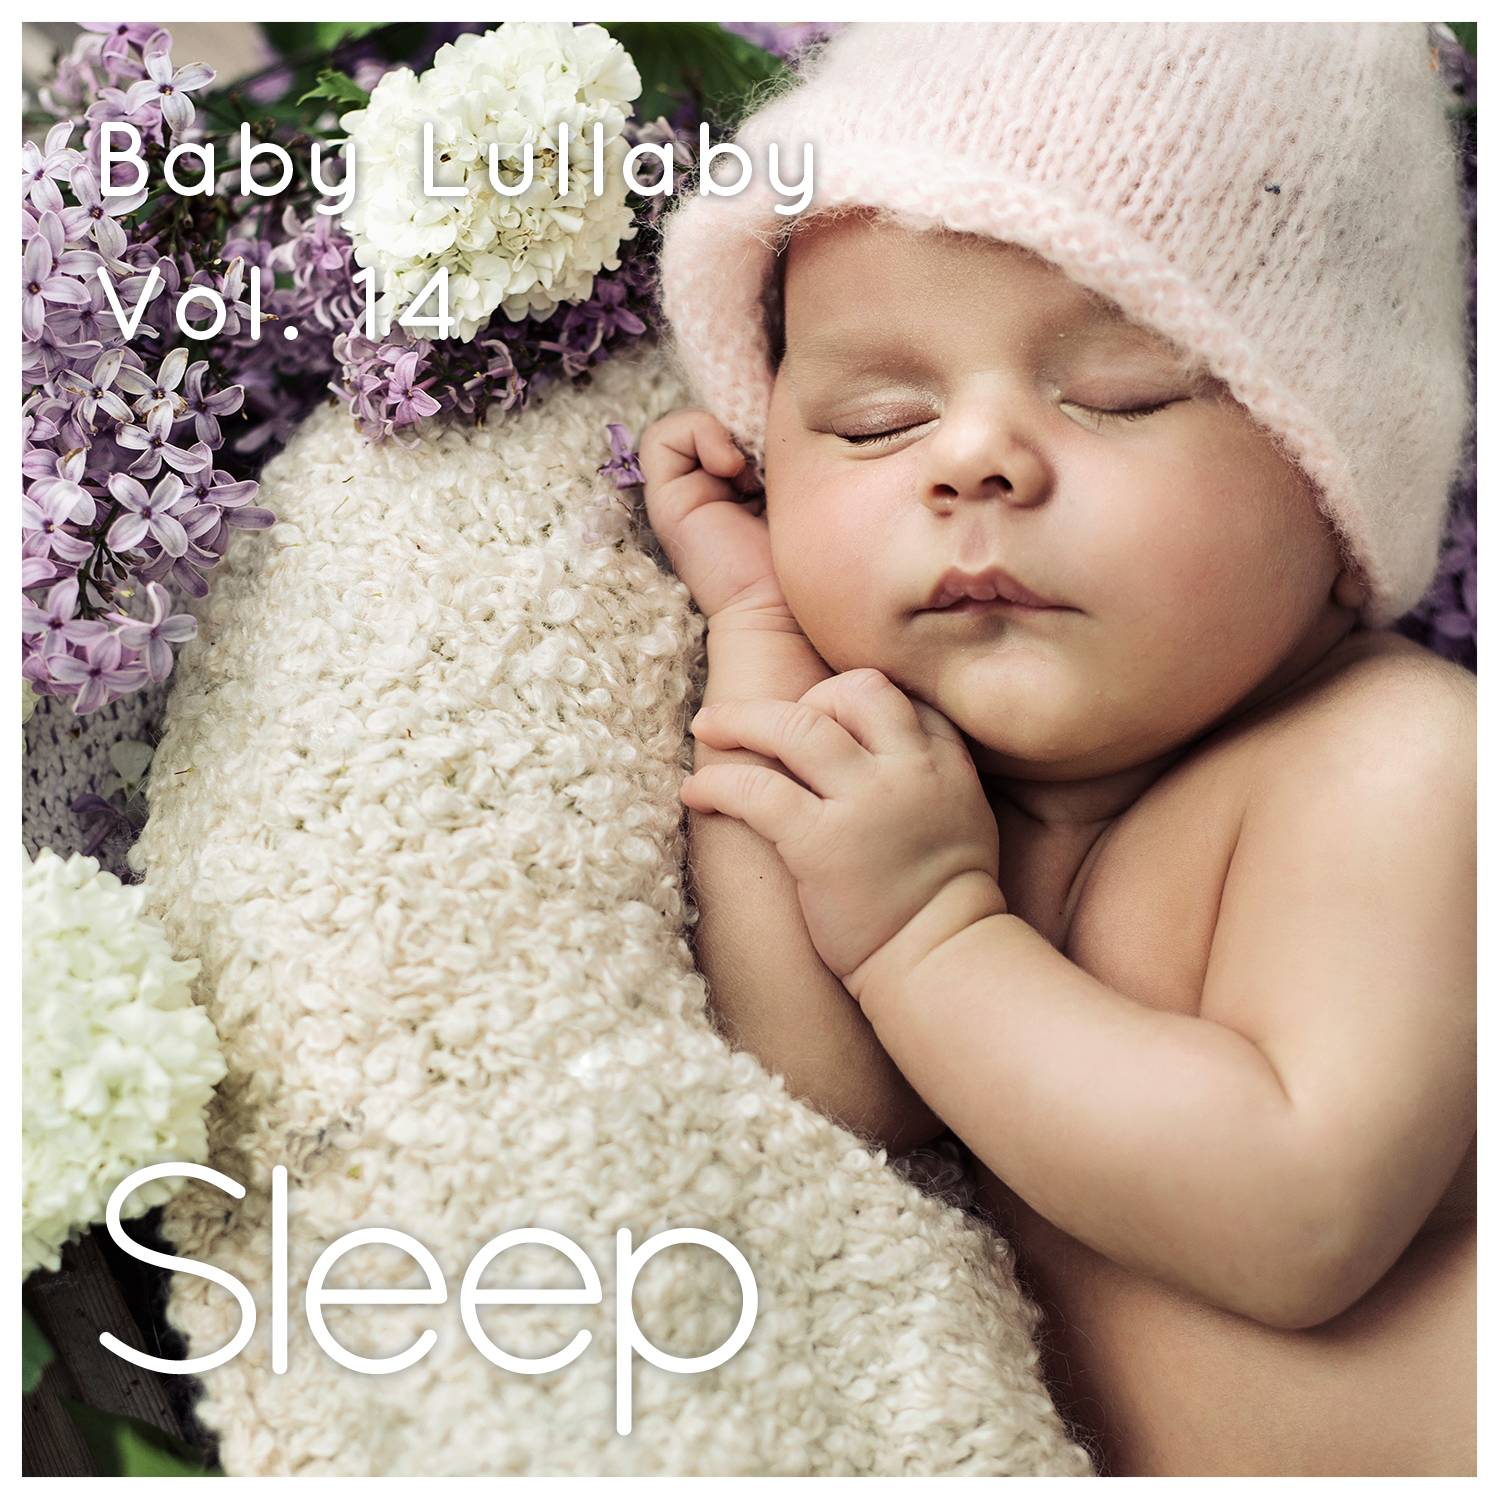 Baby Sleep Ambient Lullaby, Pt. 68